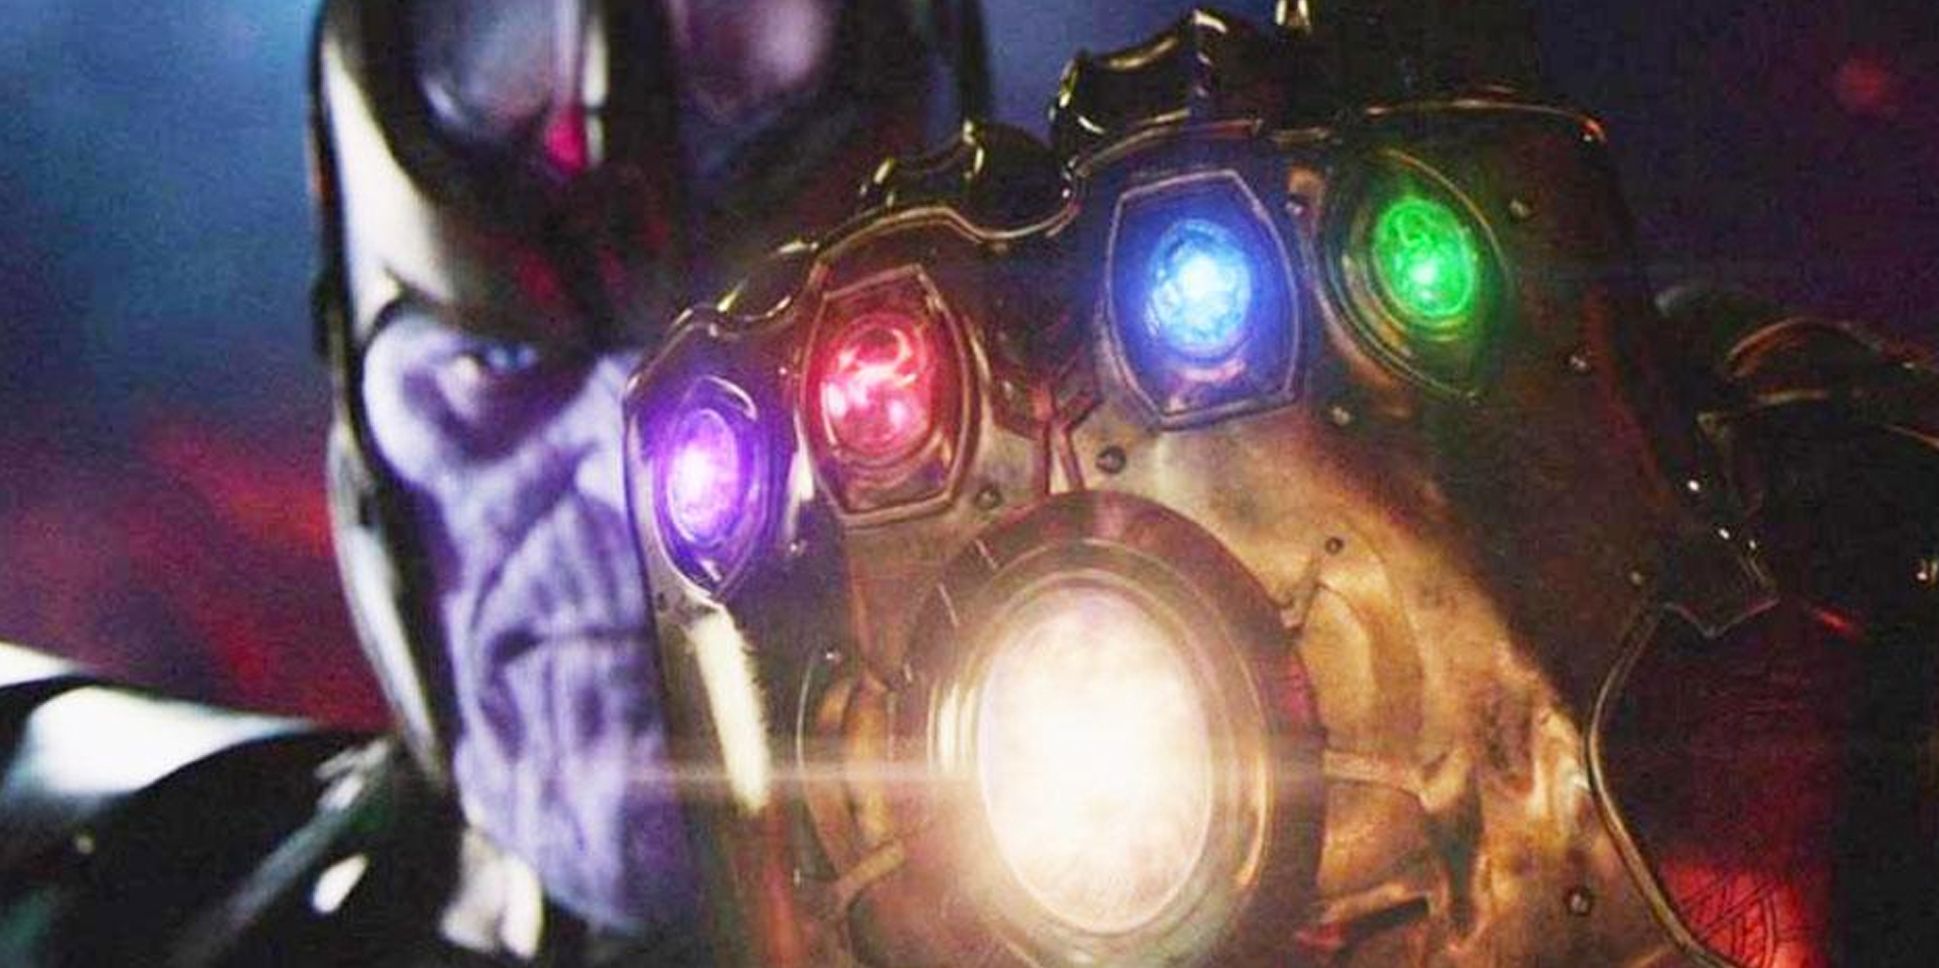 Thanos with the Completed Infinity Ganutlet